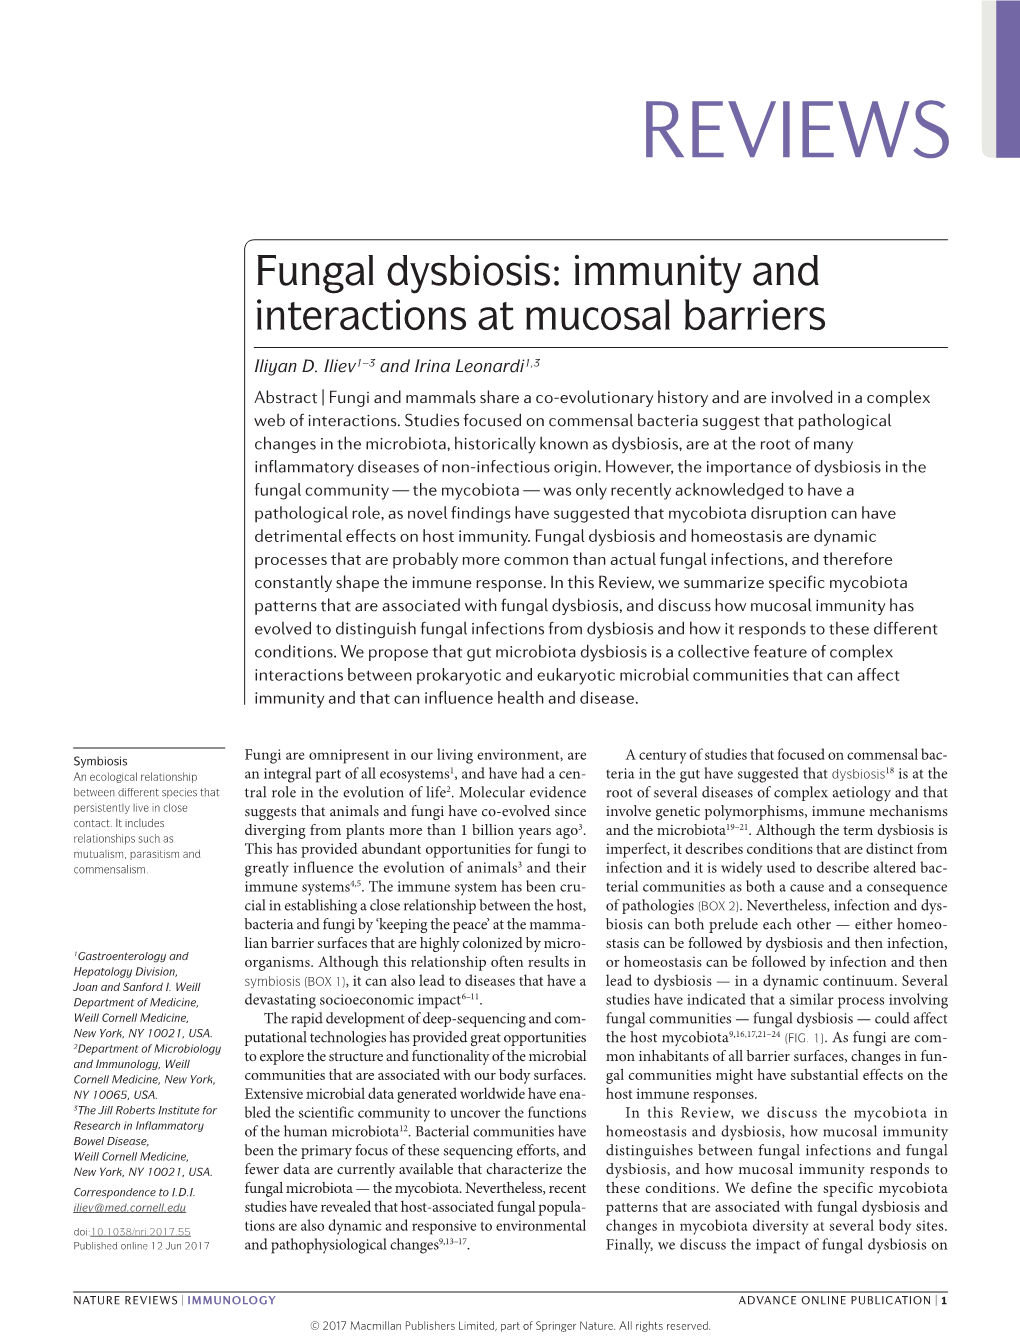 Fungal Dysbiosis: Immunity and Interactions at Mucosal Barriers